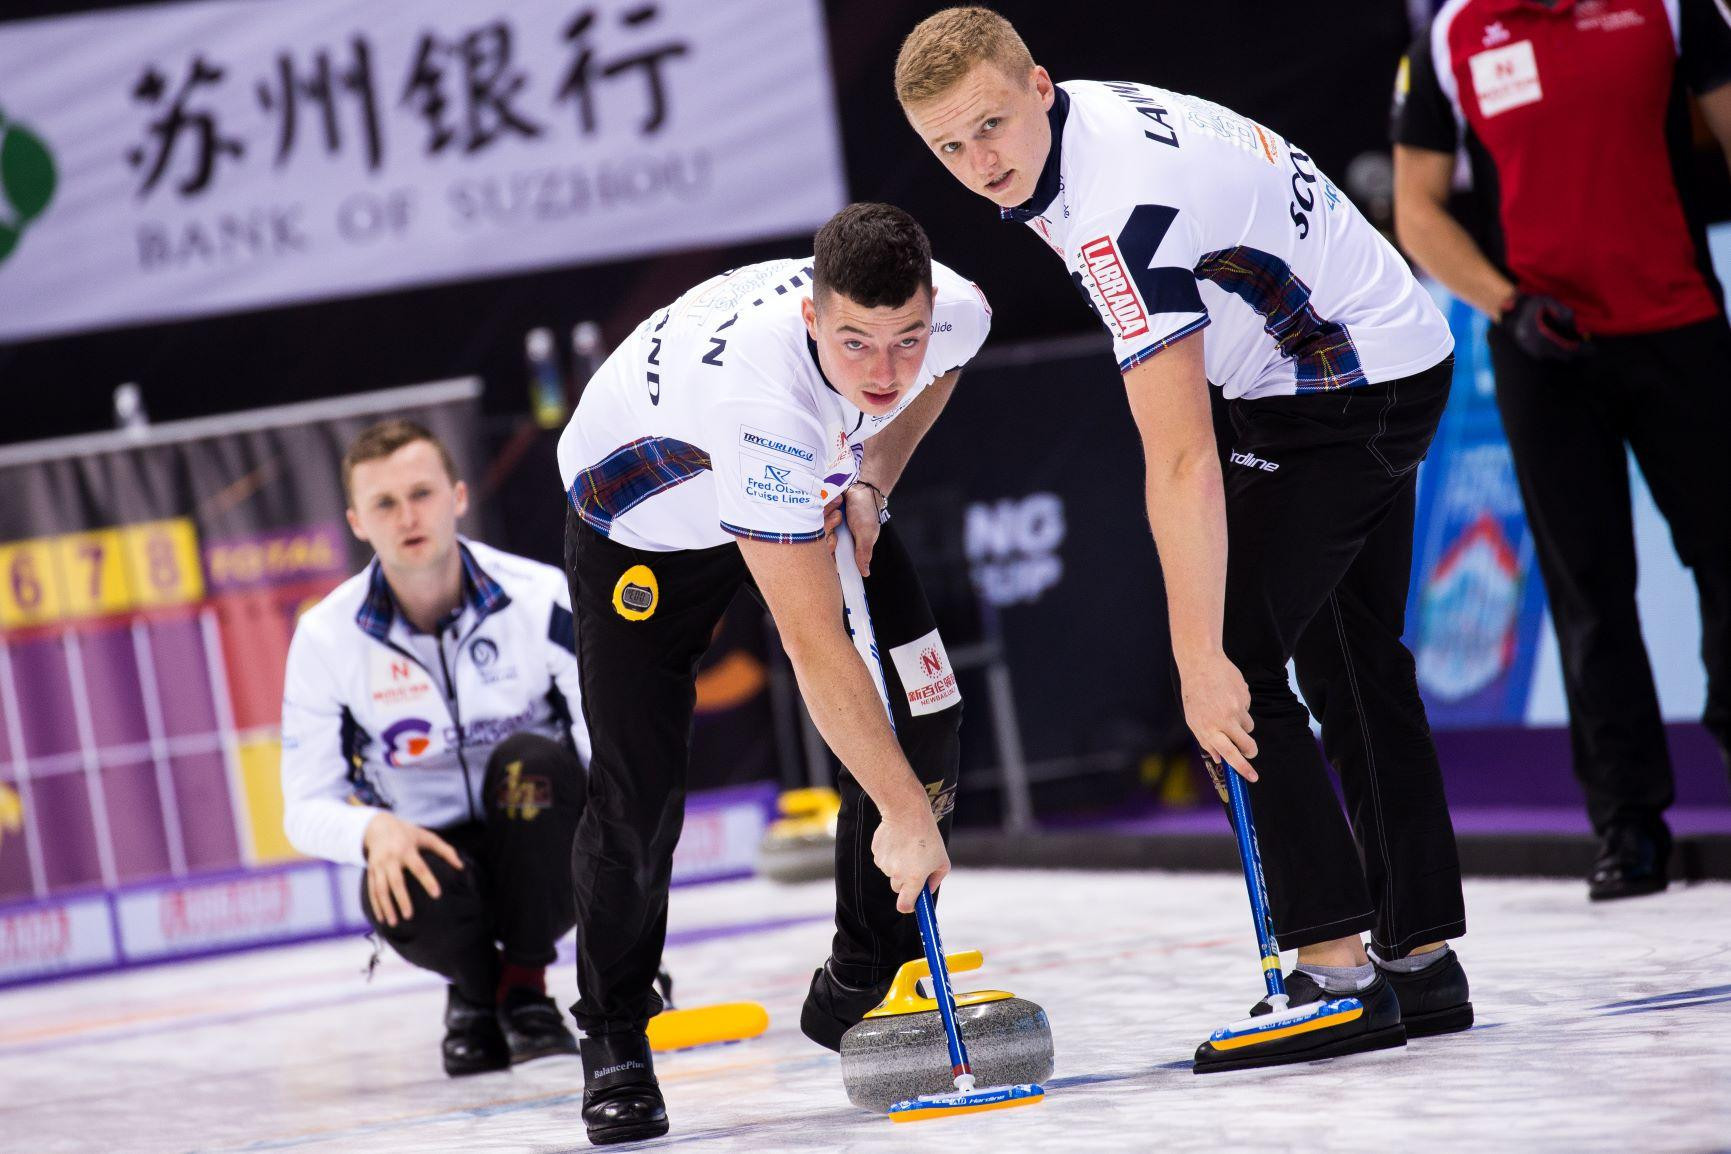 Canada profit from Scottish agony to reach men's final at Curling World Cup